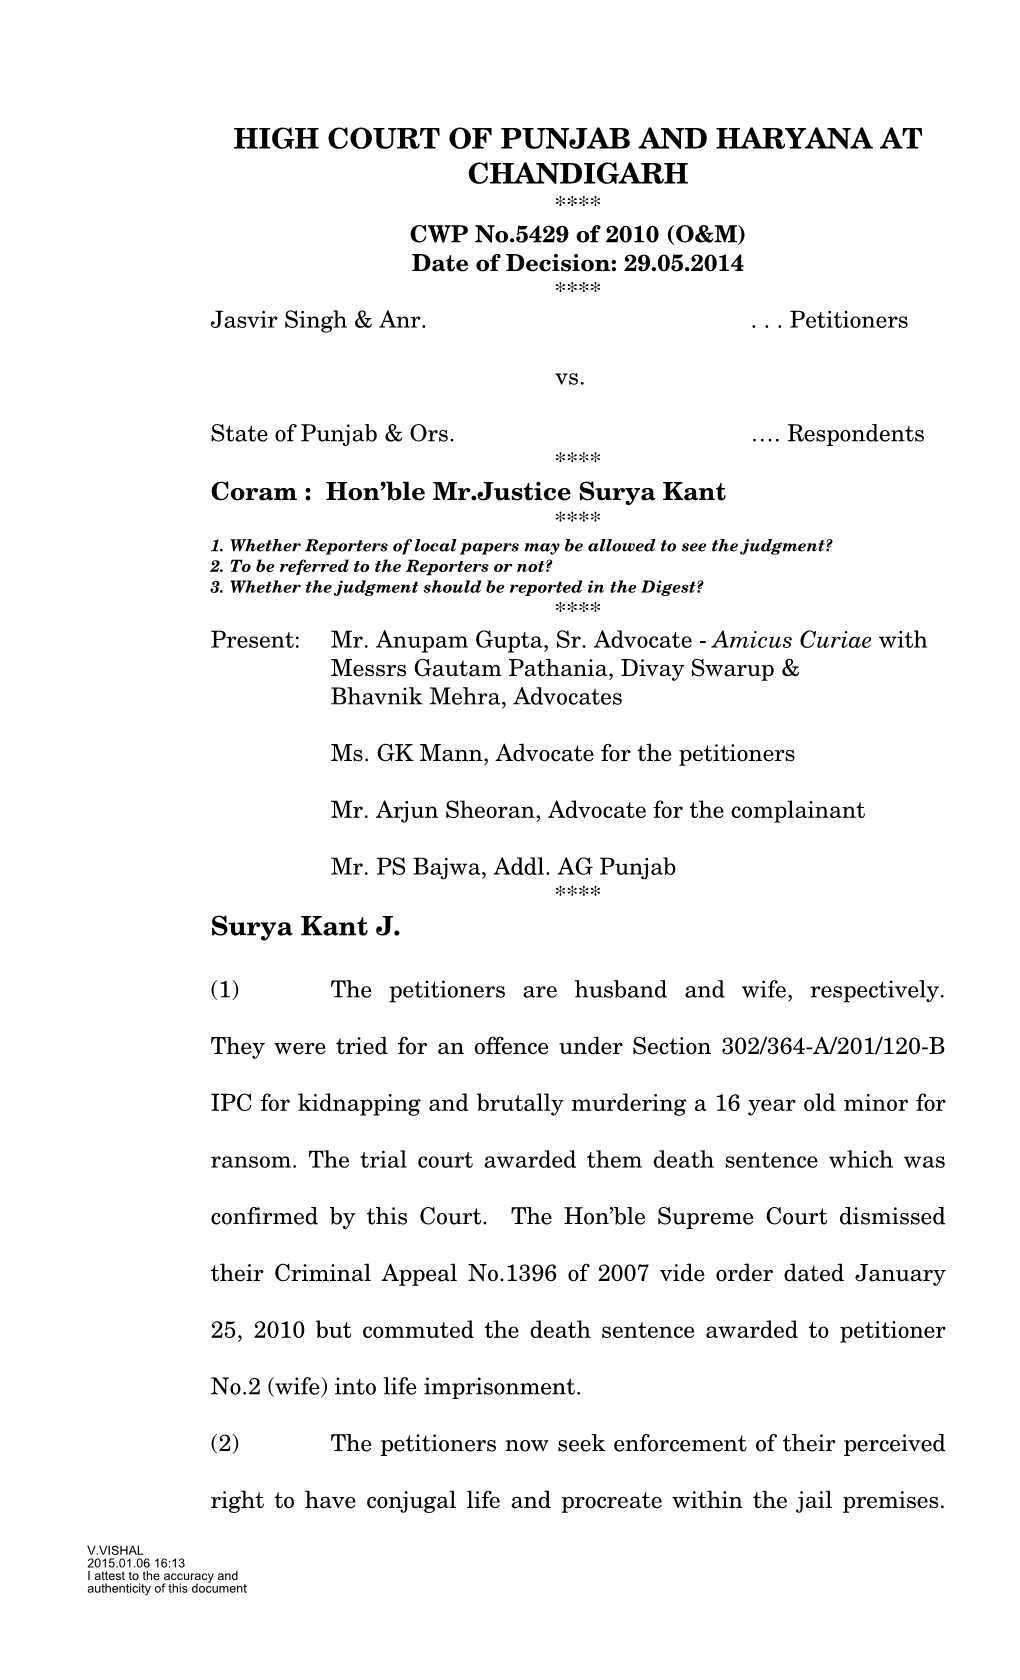 HIGH COURT of PUNJAB and HARYANA at CHANDIGARH **** CWP No.5429 of 2010 (O&M) Date of Decision: 29.05.2014 **** Jasvir Singh & Anr